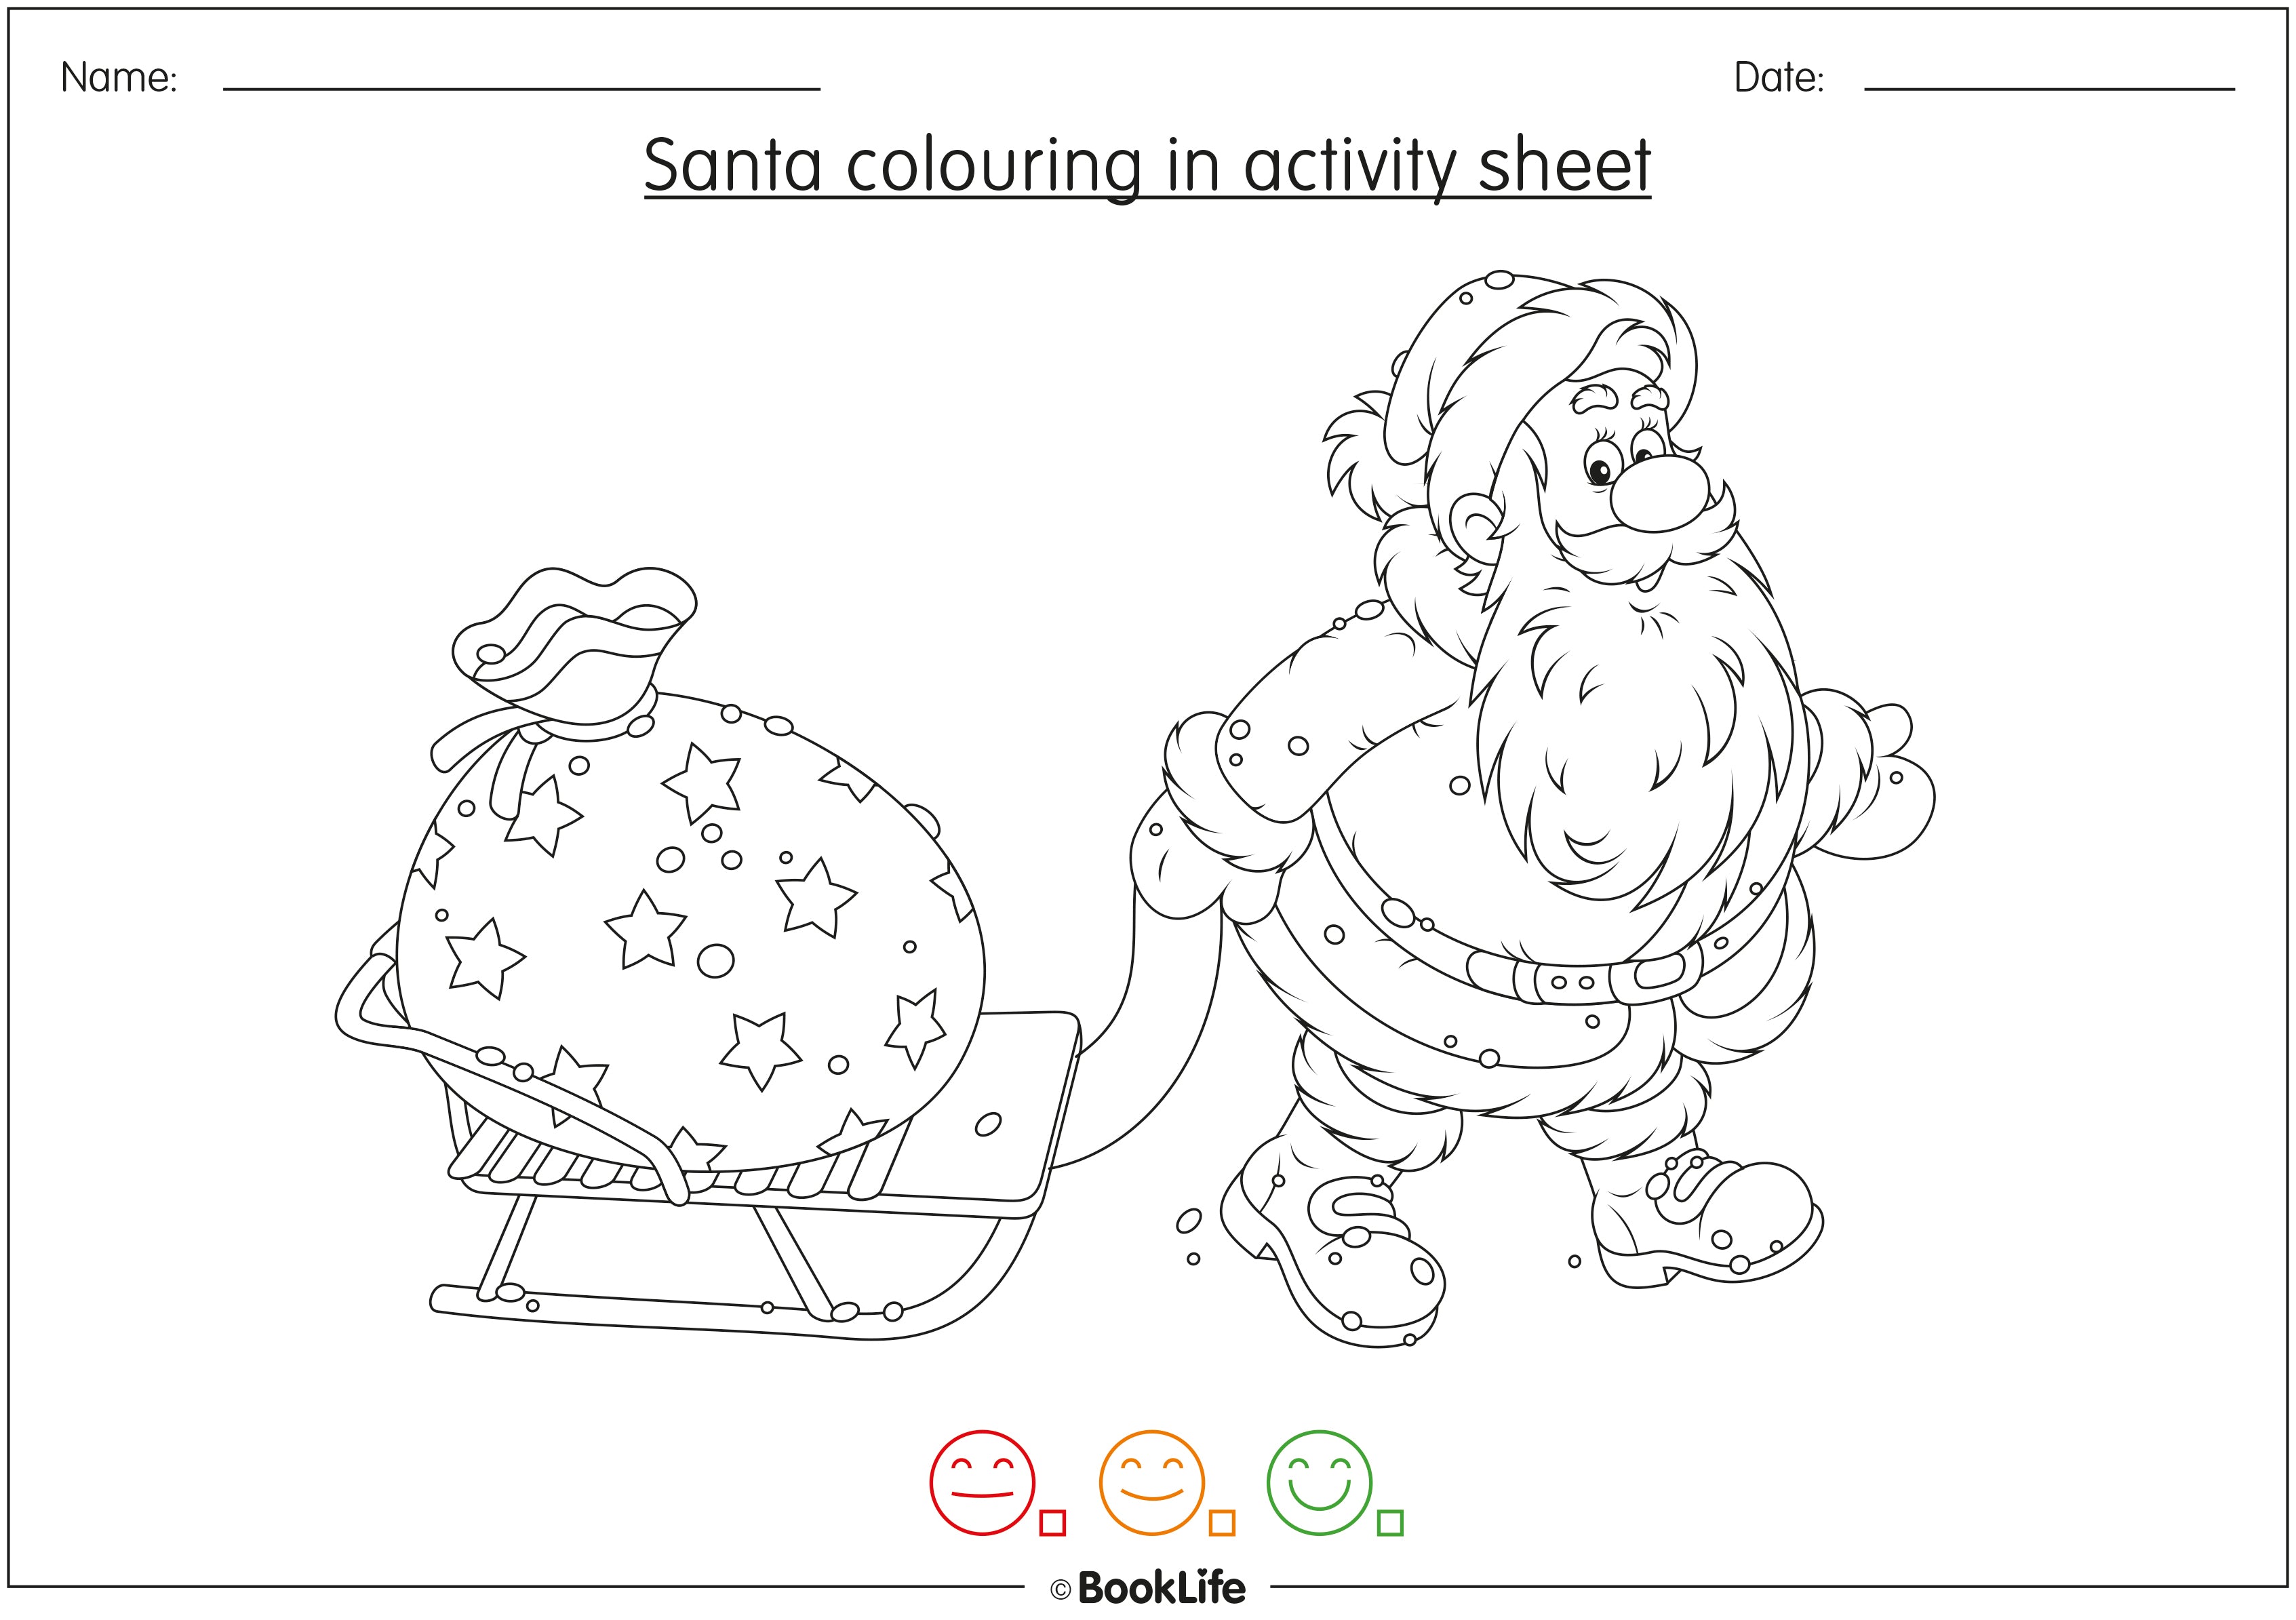 Santa Colouring In Activity Sheet by BookLife